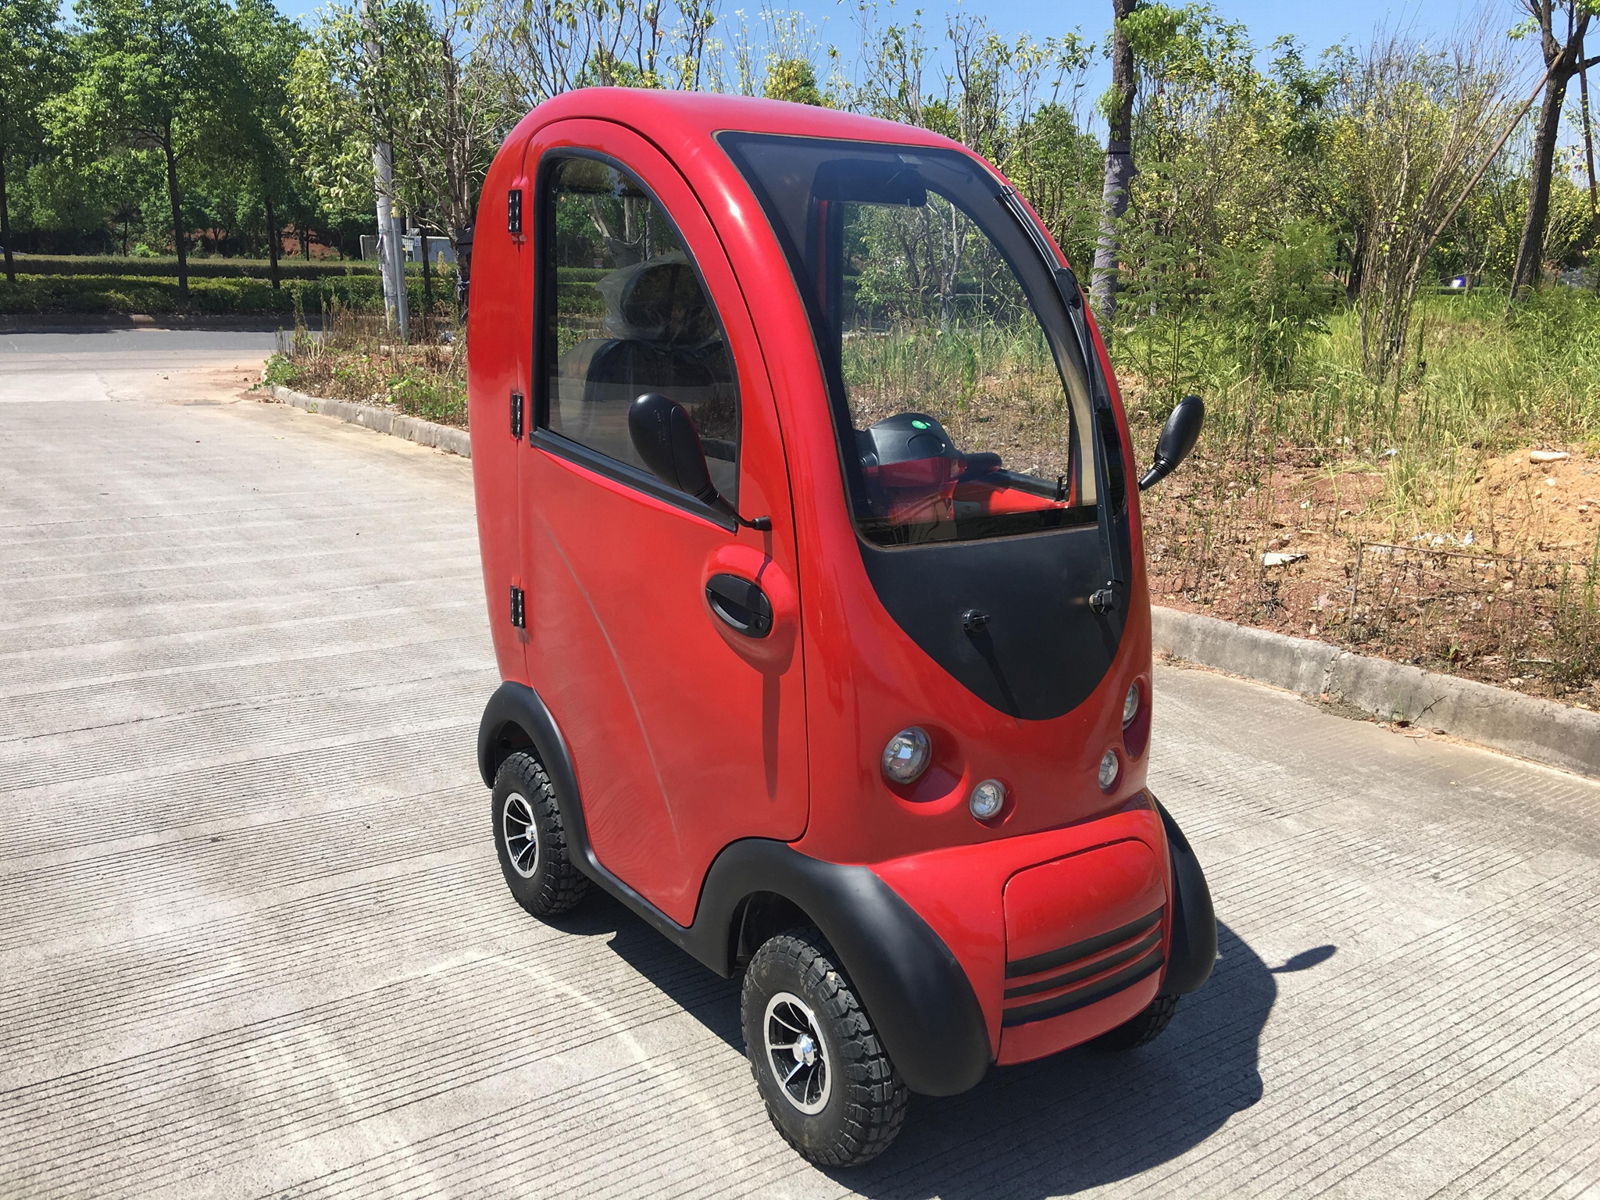 Luxury fully enclosed mobility cabin electric scooter outdoor fast mobility scoo 2